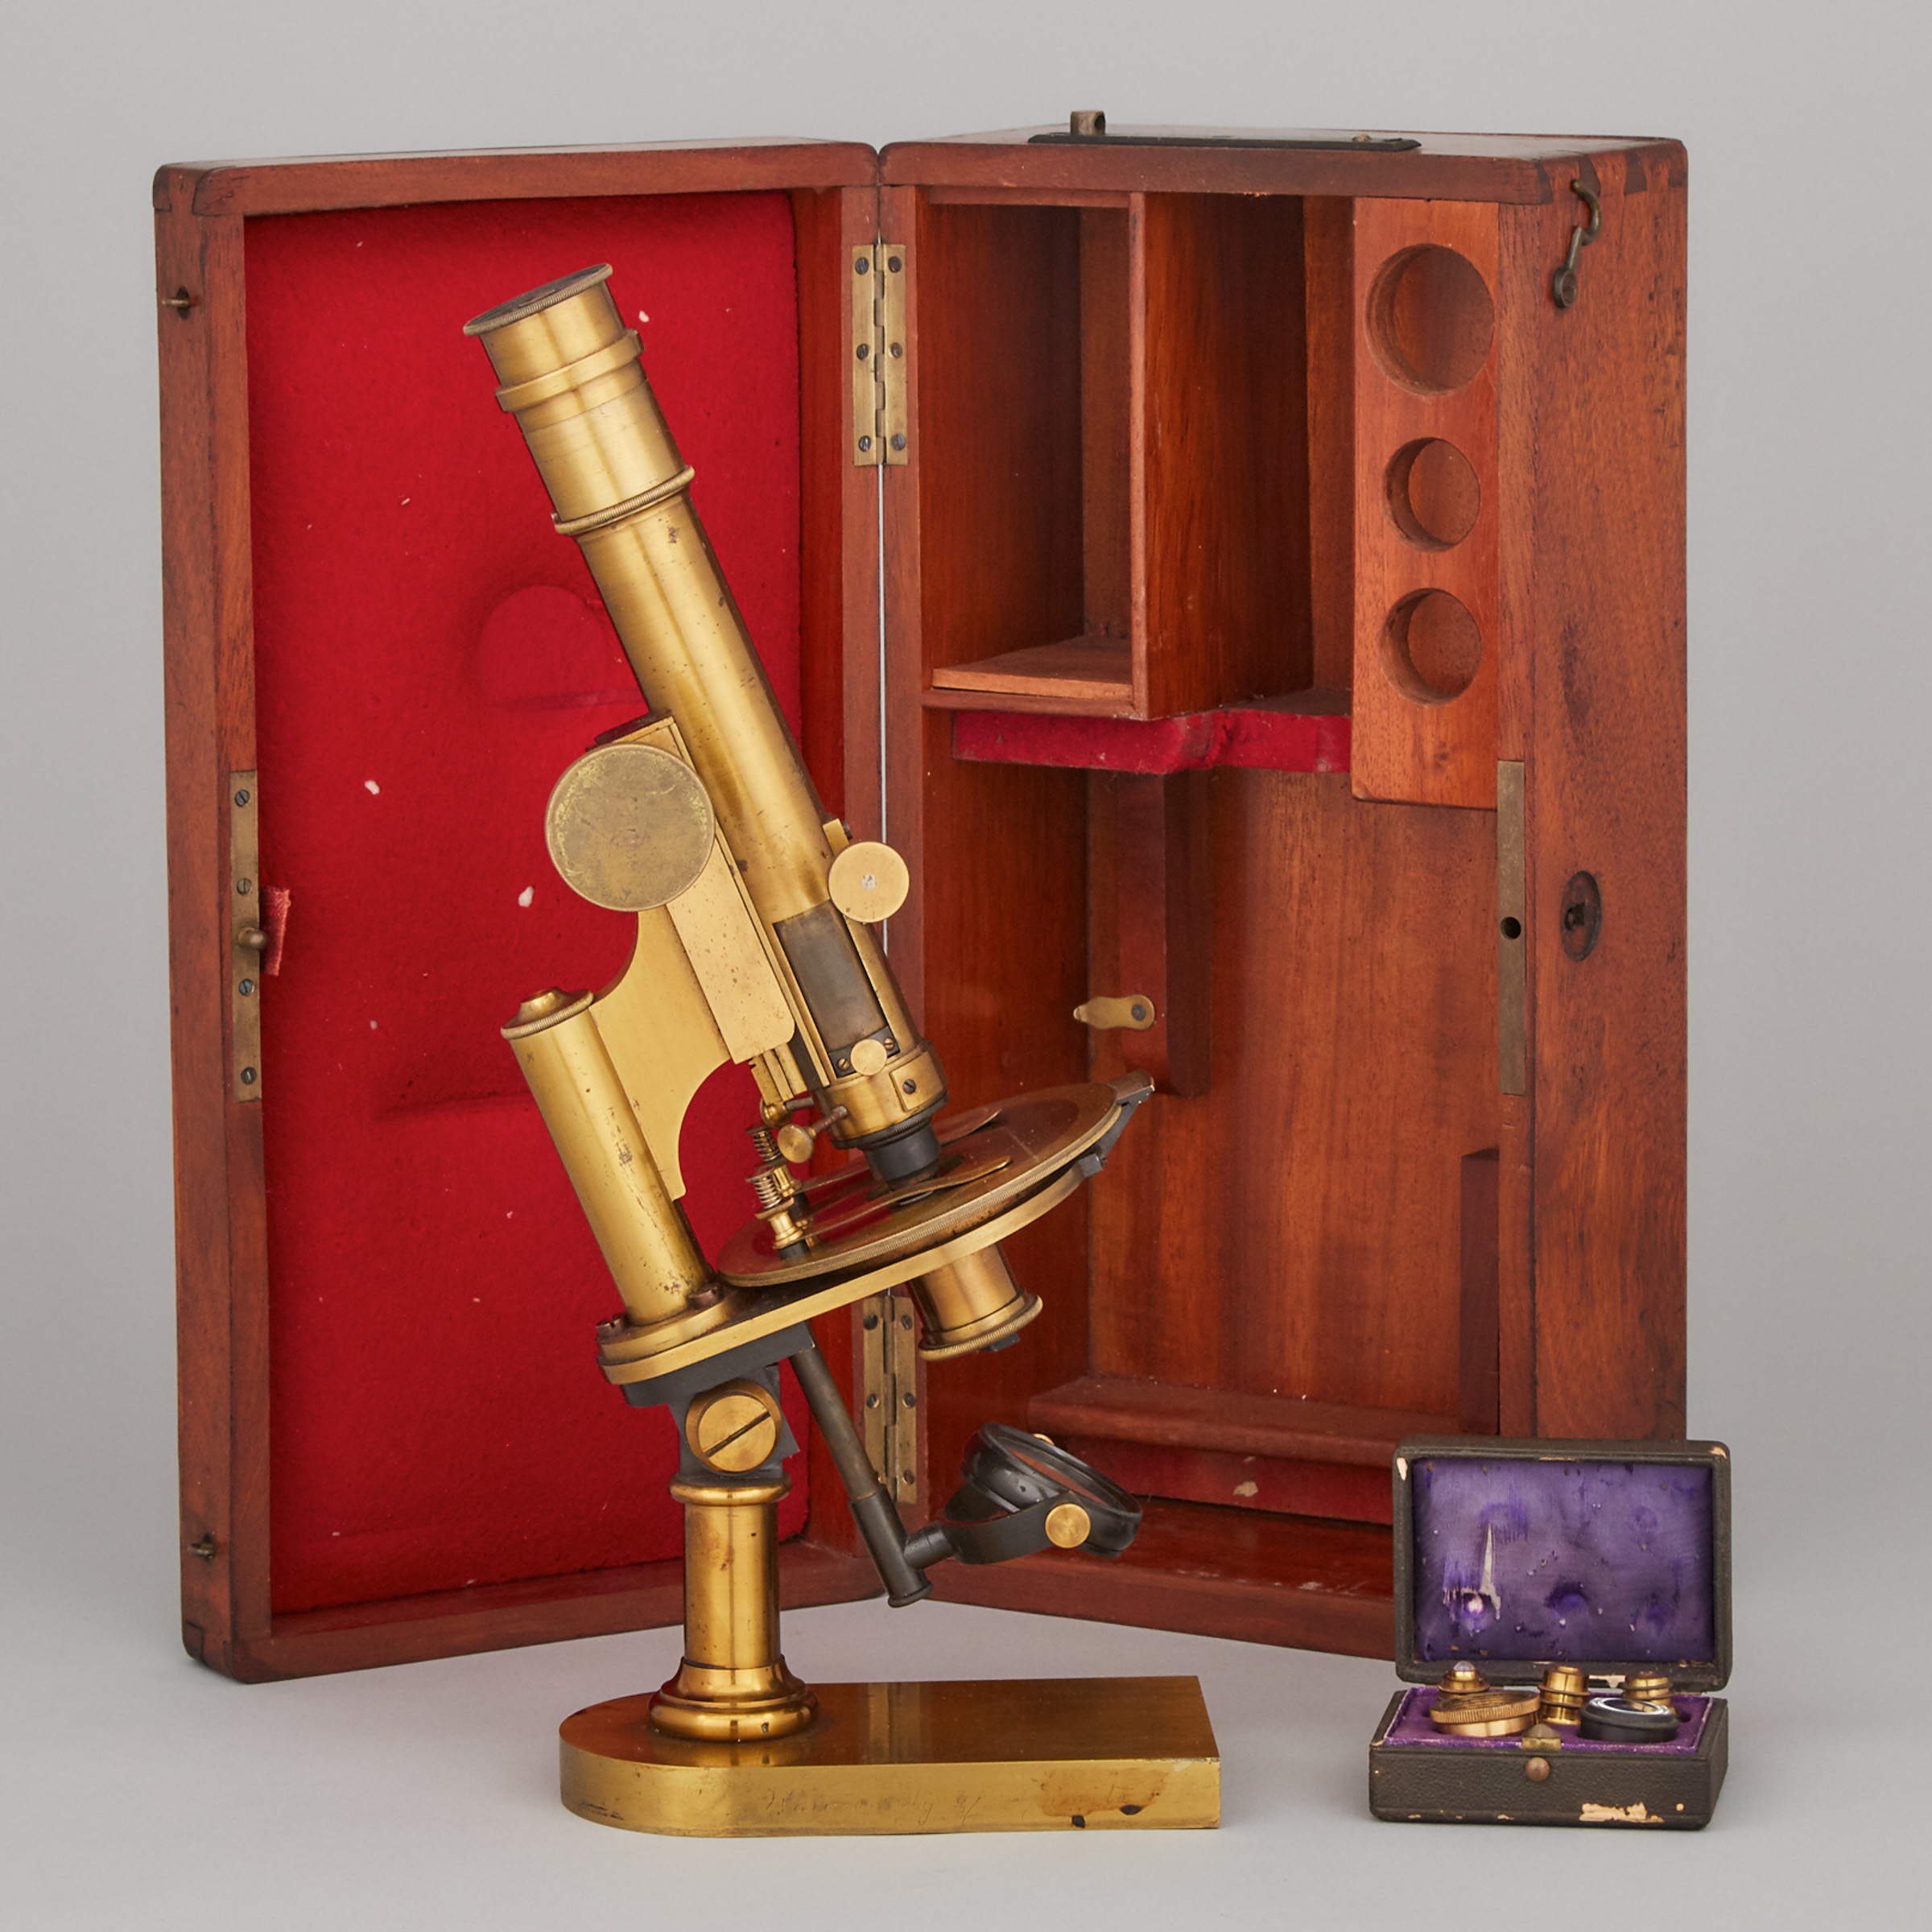 Edwardian Lacquered Brass Petrographic Microscope, early 20th century